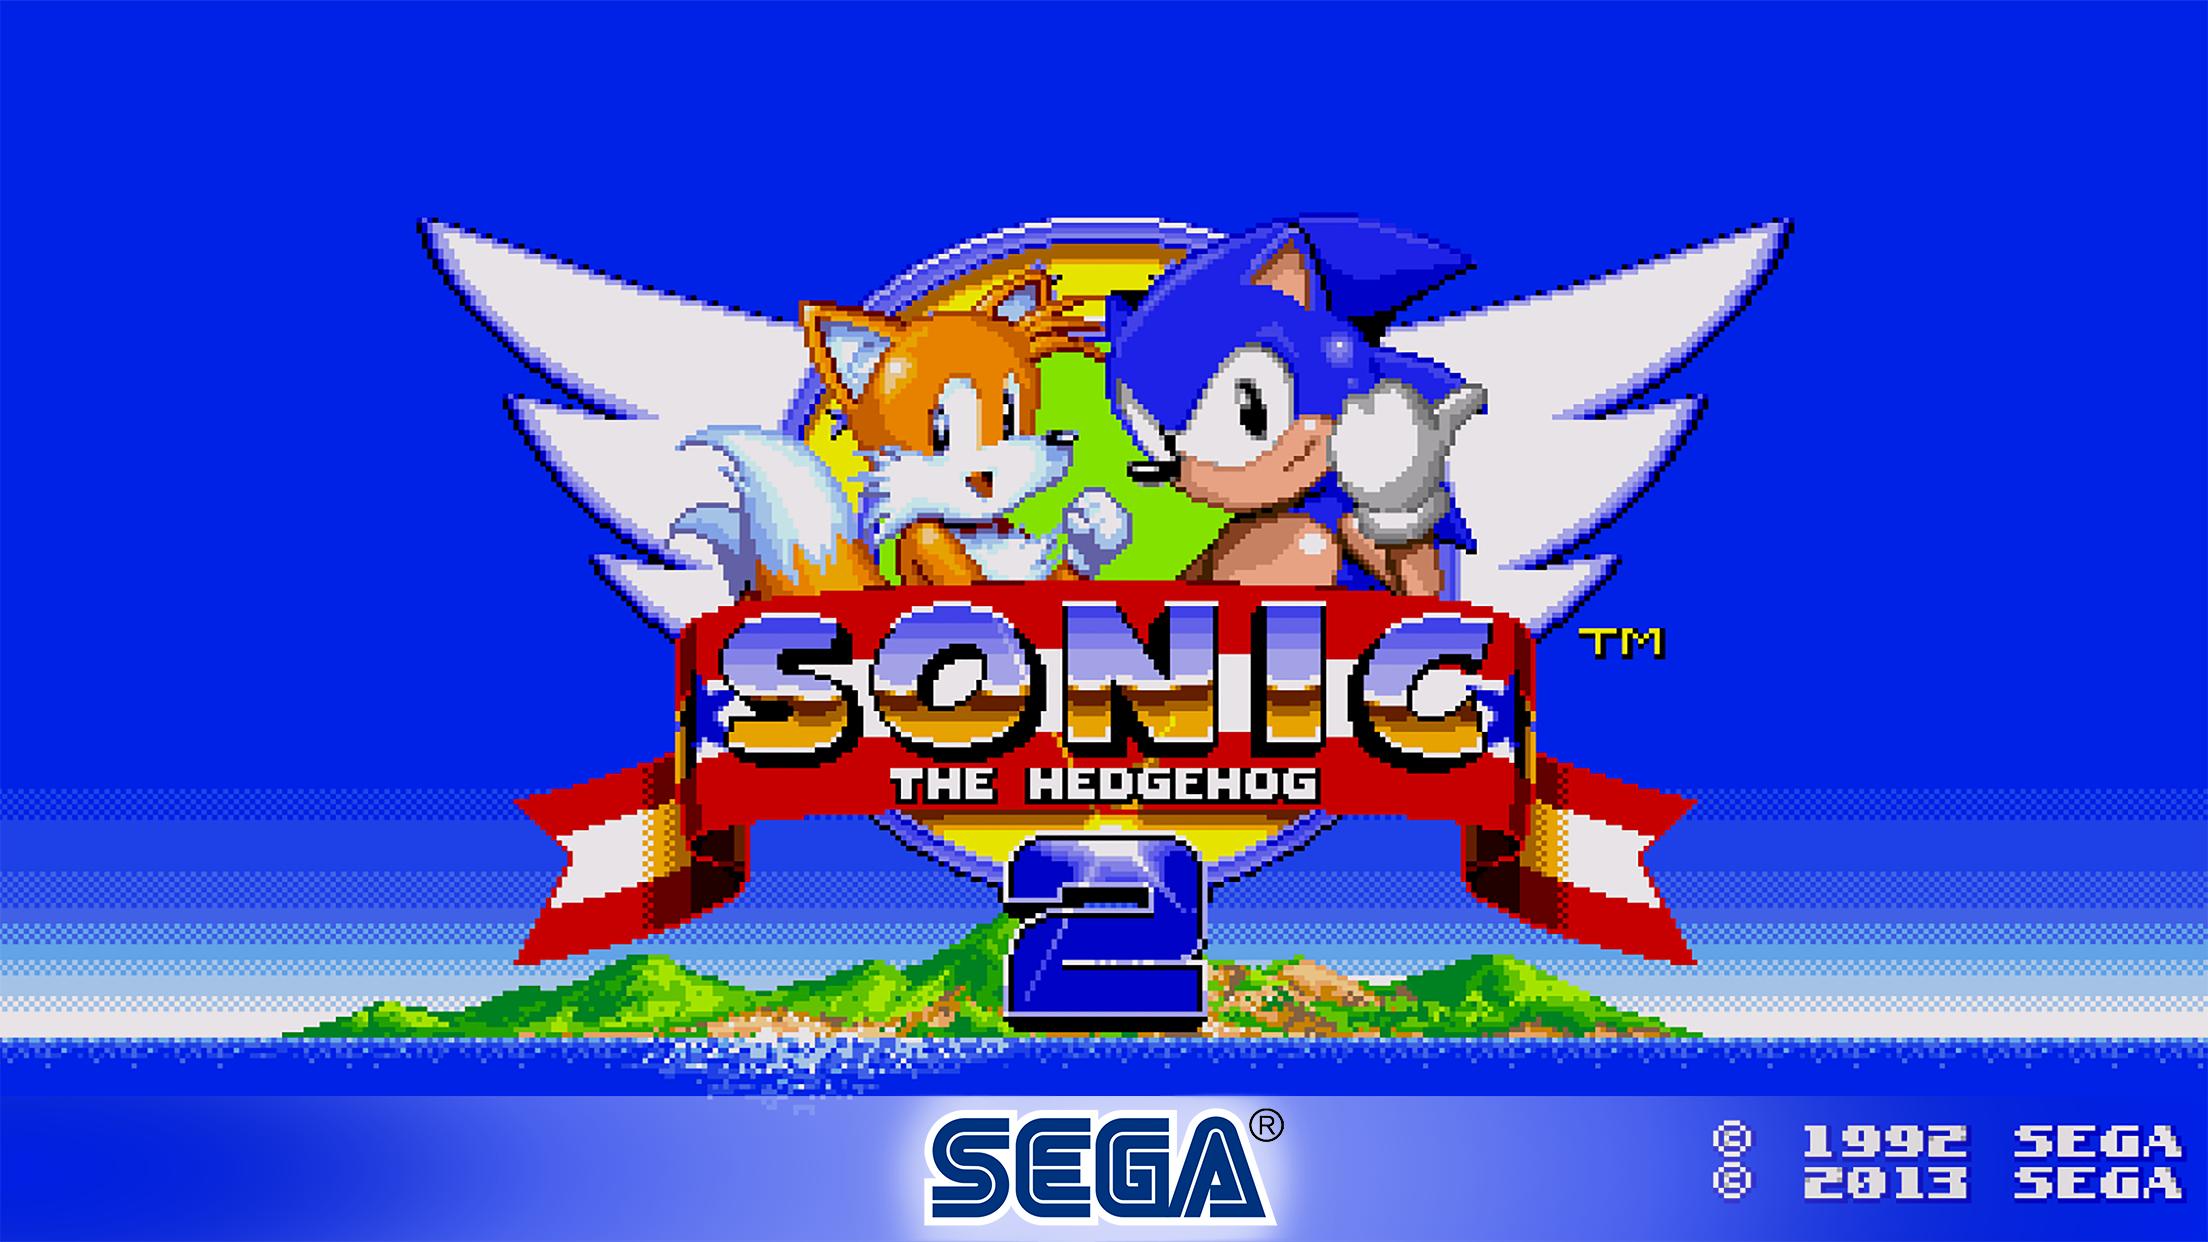 Download Sonic The Hedgehog 4 Ep. II android on PC